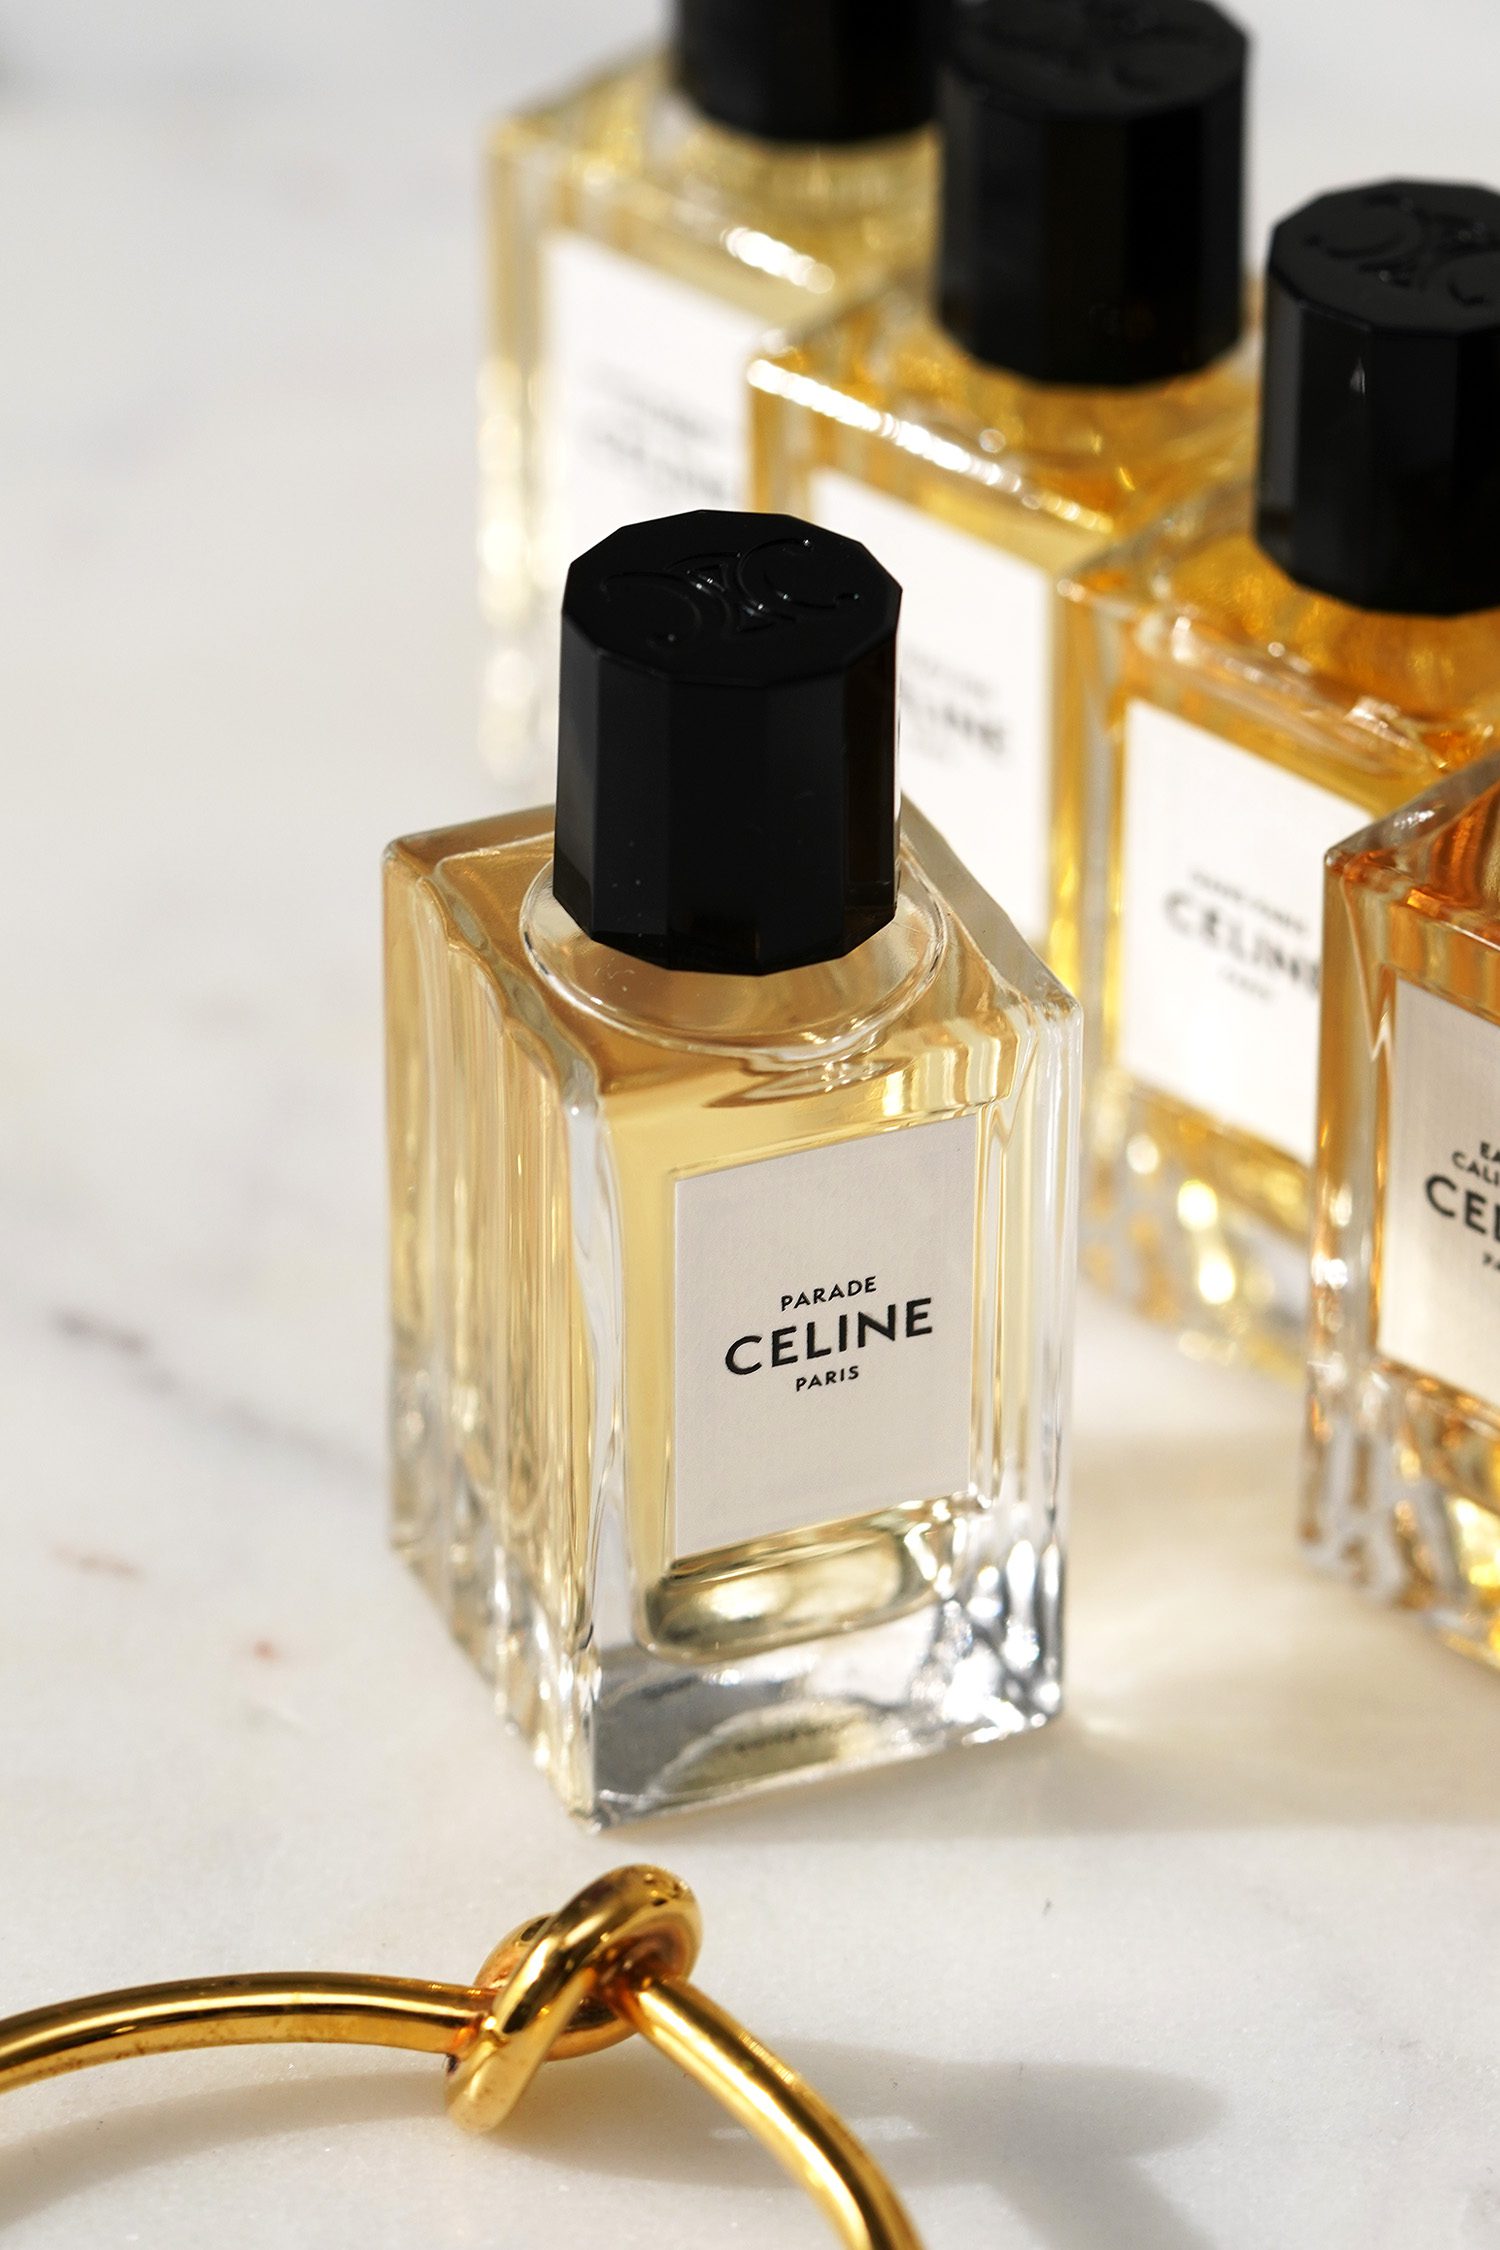 Celine Fragrance Collection Haul & Review - The Beauty Look Book